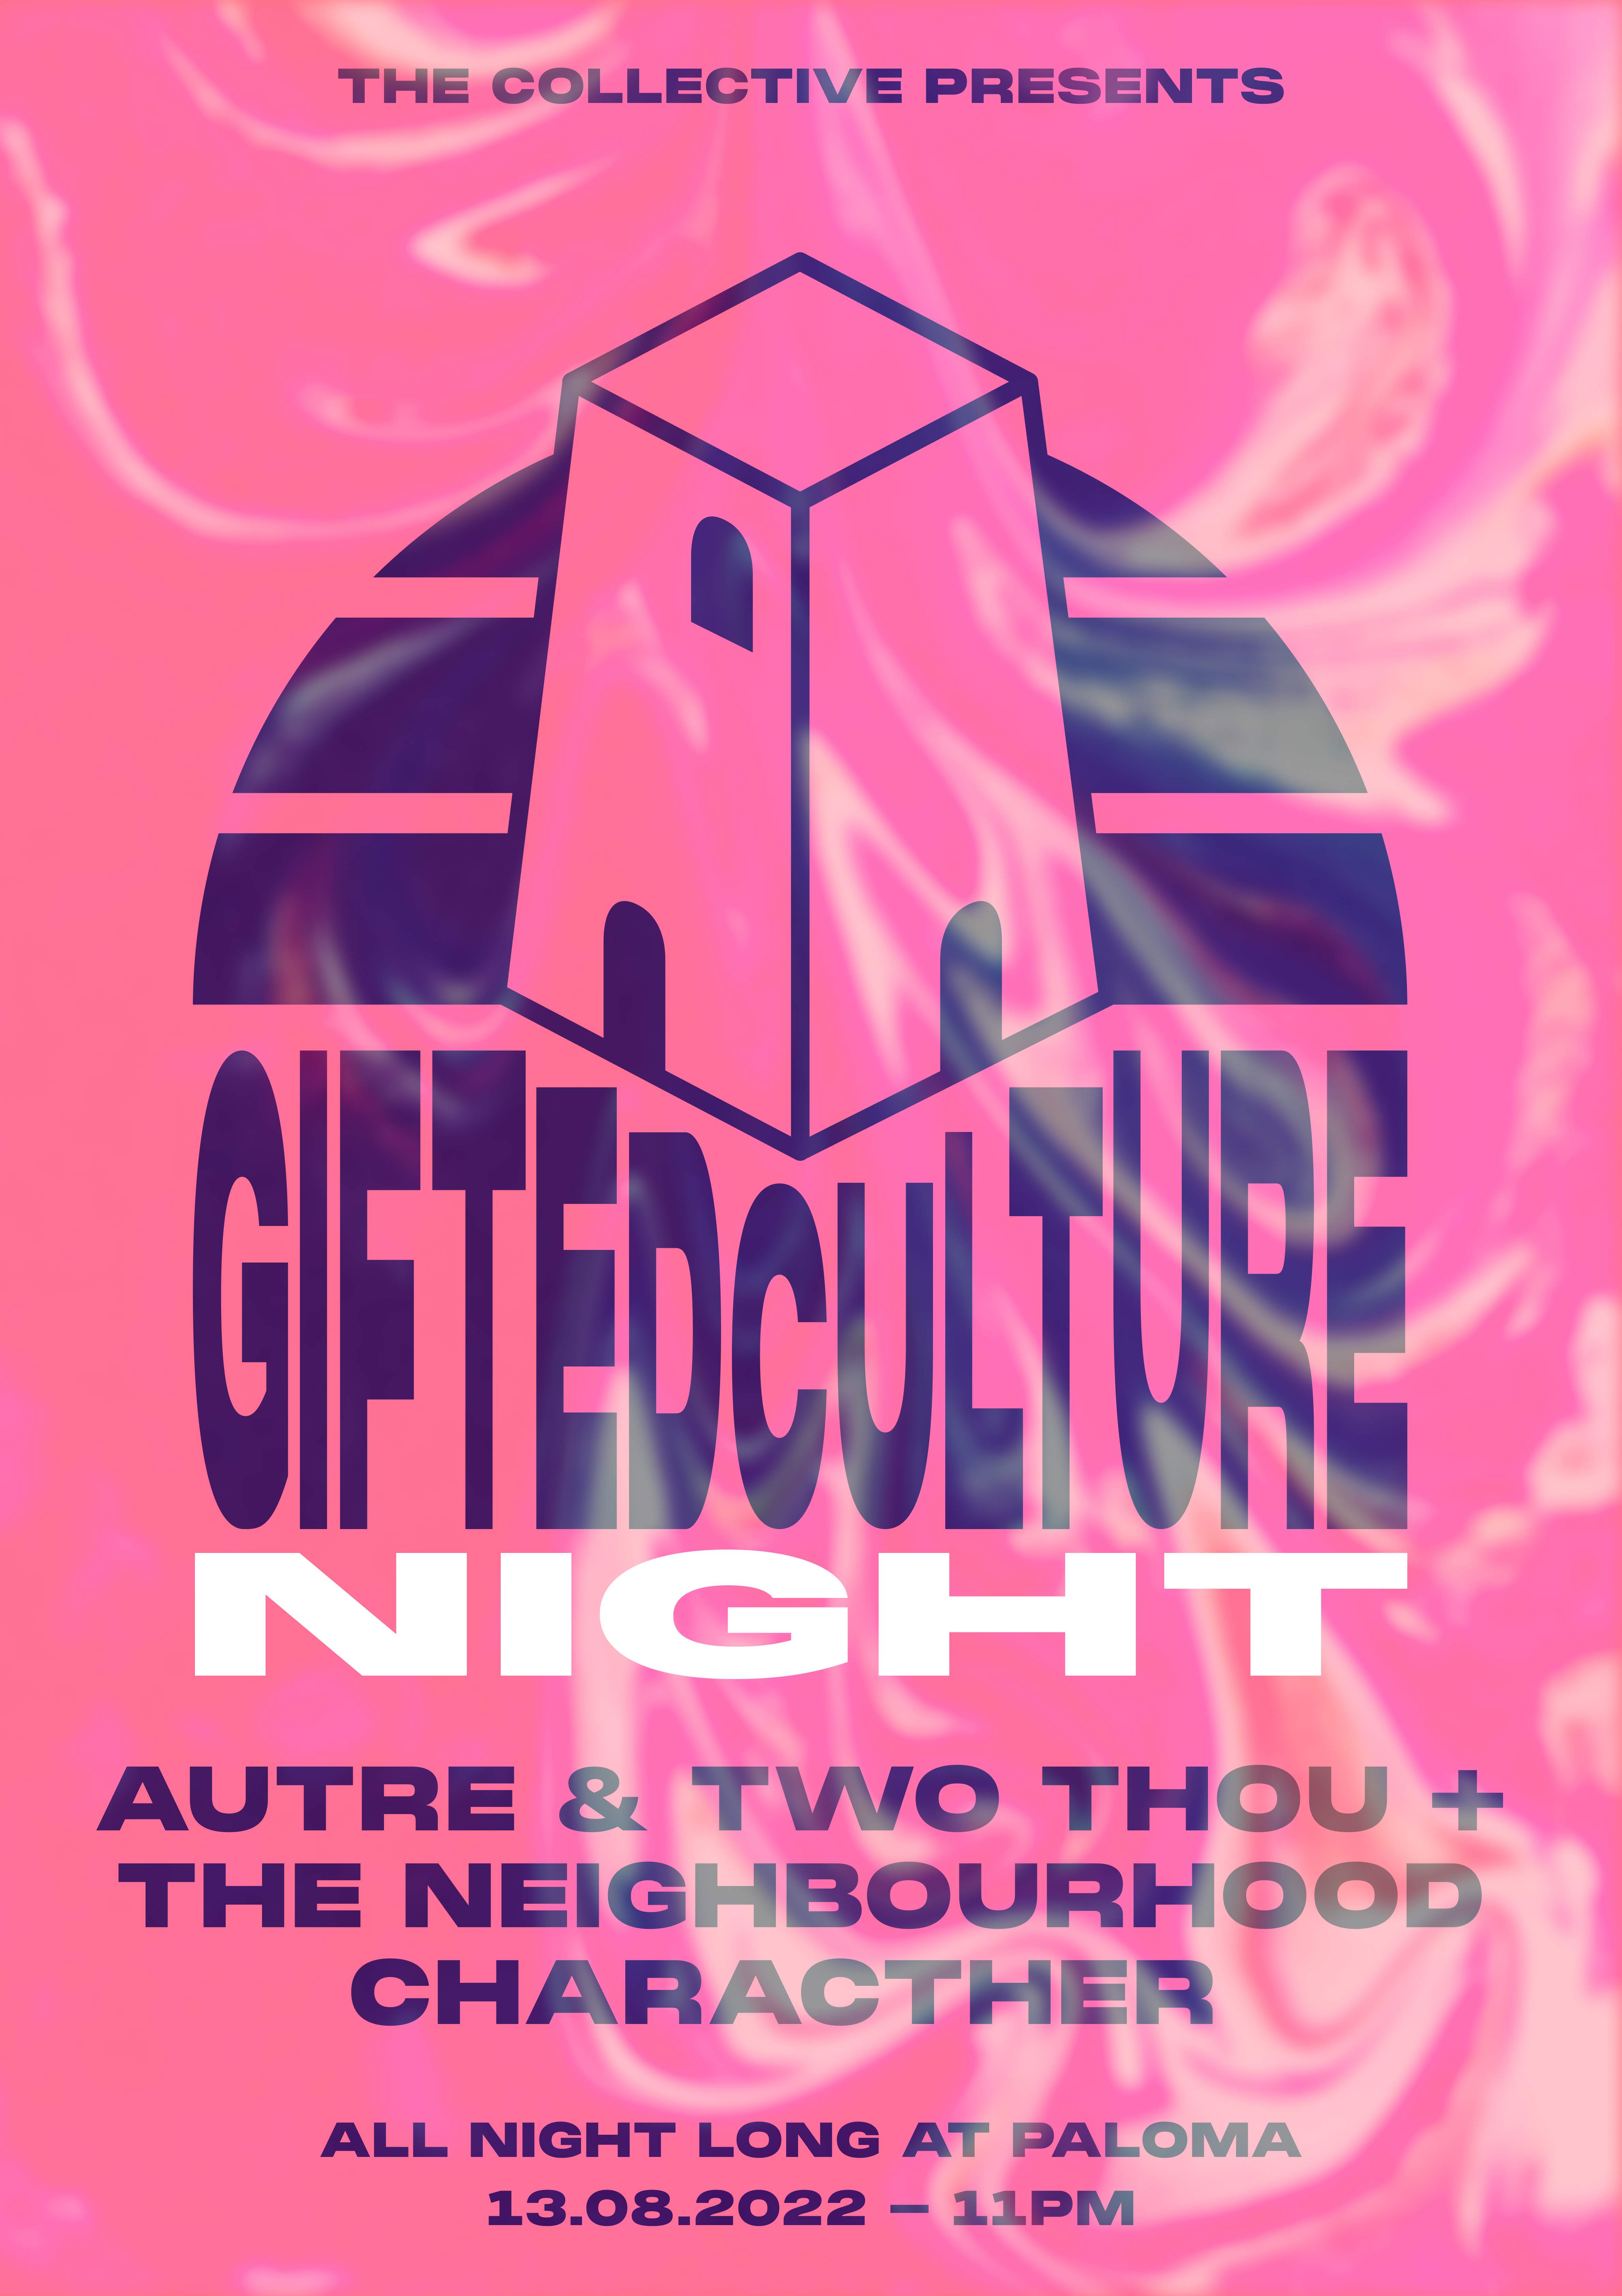 Gifted Culture Night with Autre, Two Thou, The Neighbourhood Character - Página frontal